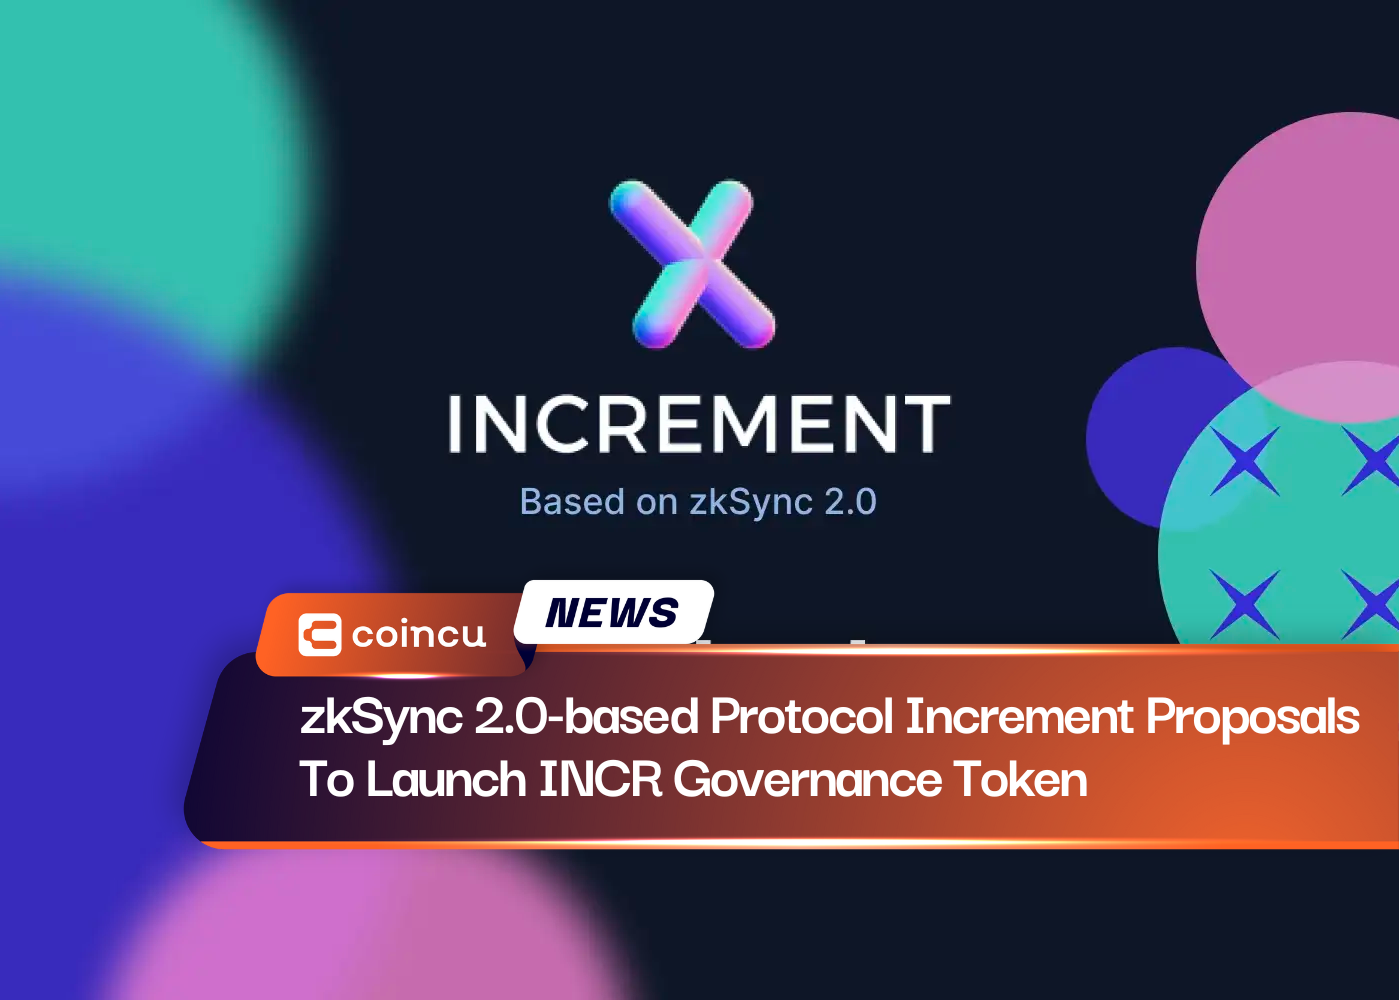 zkSync 2.0-based Protocol. Increment Proposals To Launch INCR Governance Token